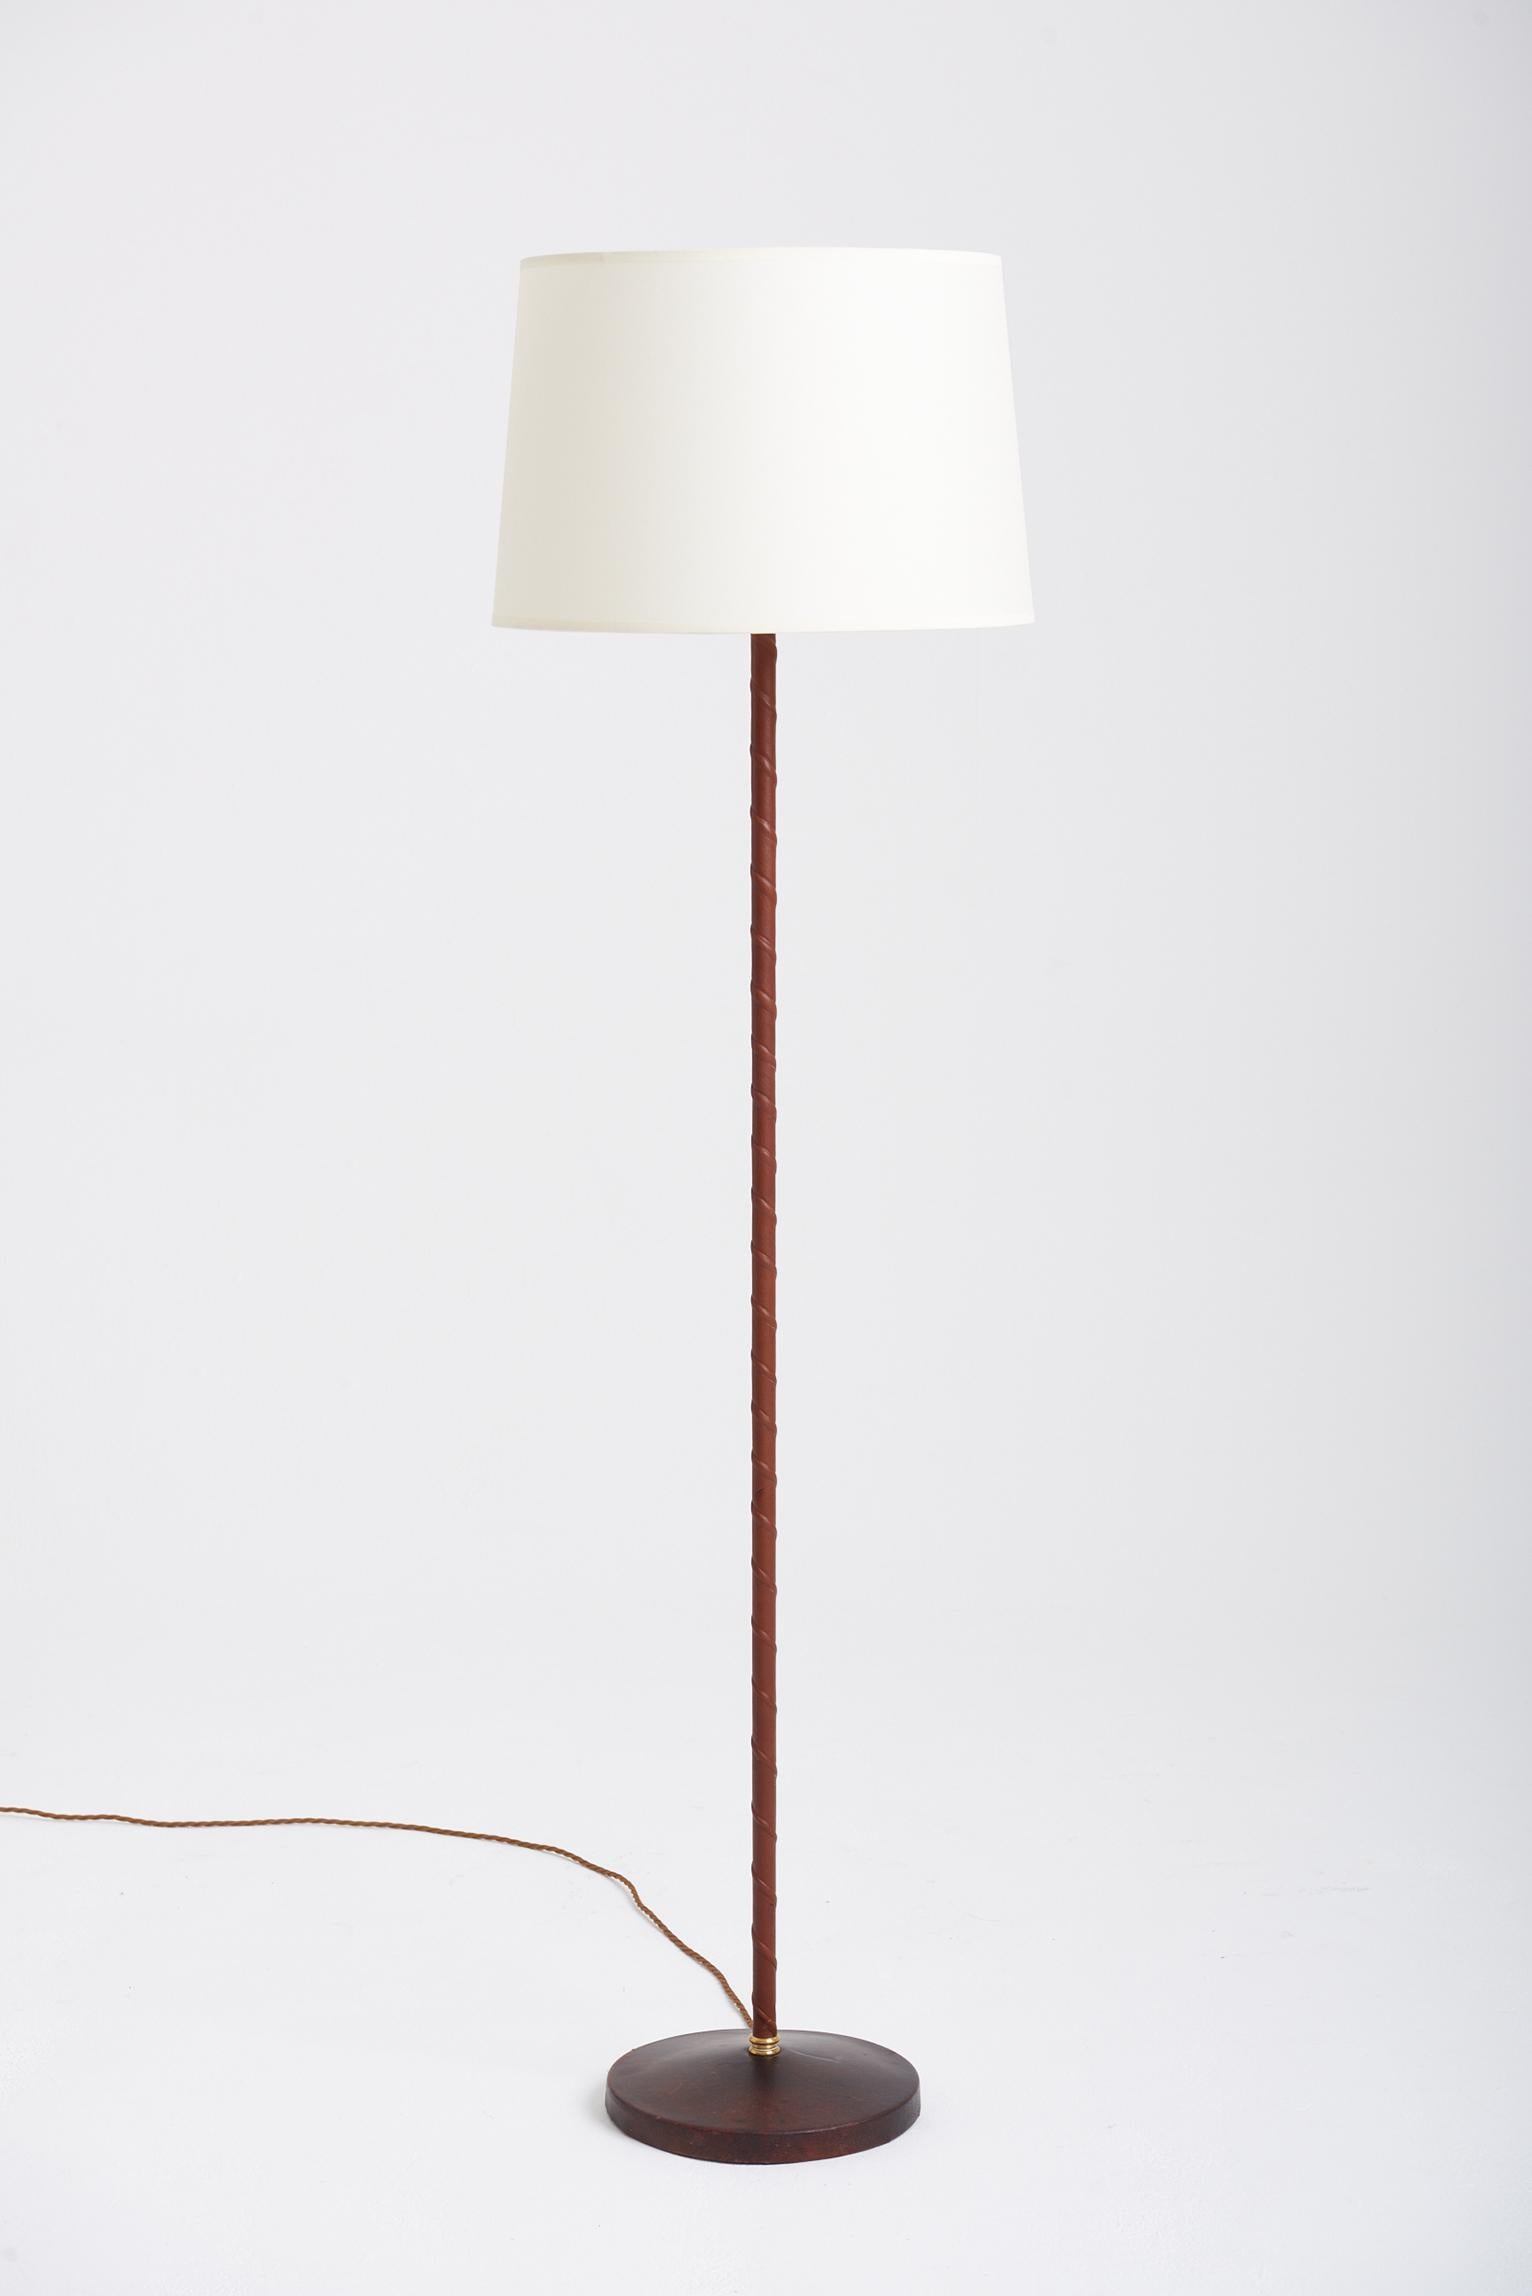 floor lamp stands only